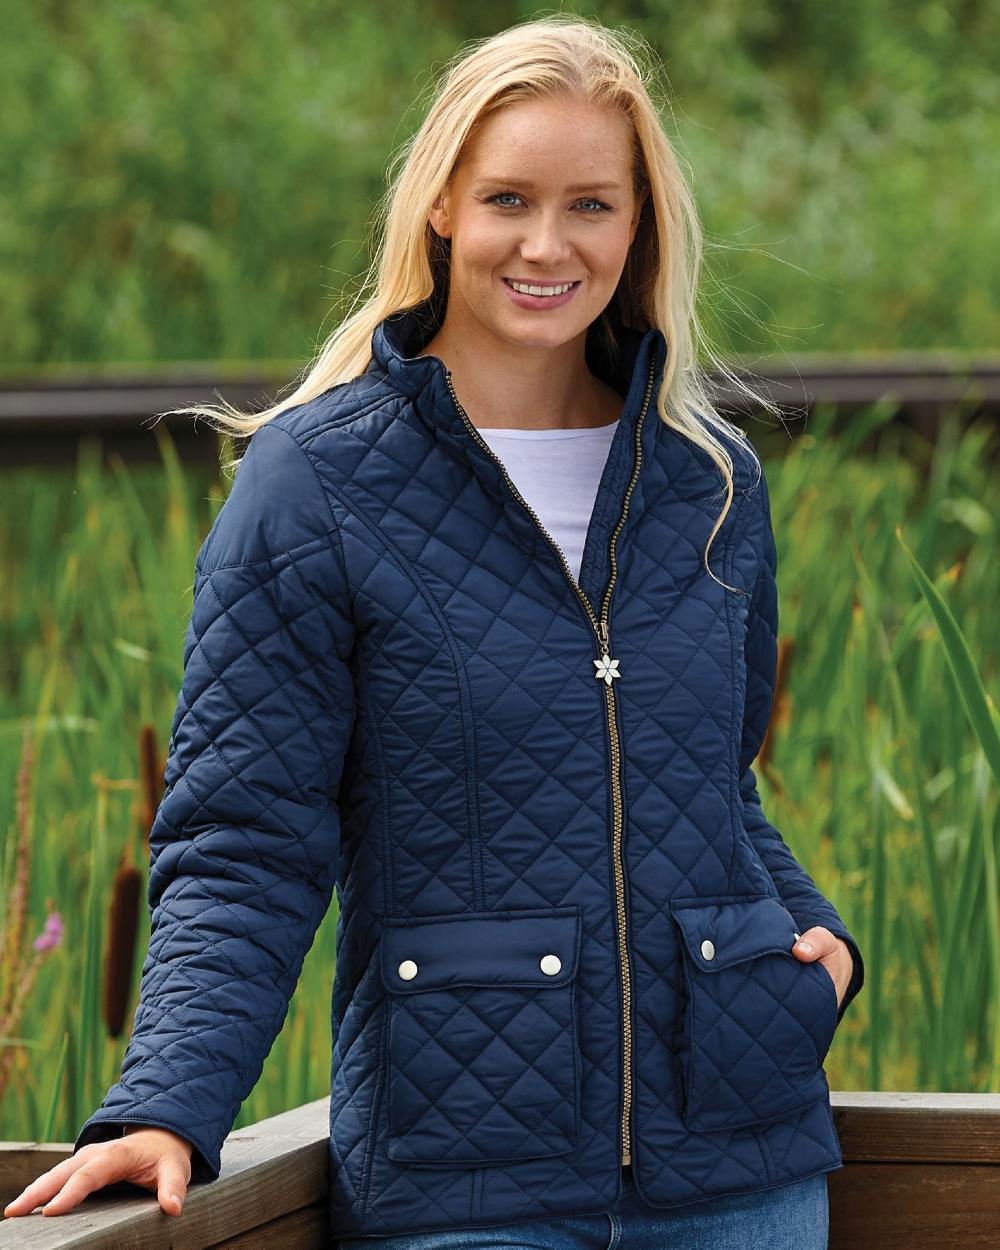 Navy Coloured Champion Wisley Quilted Jacket On A Forest Background